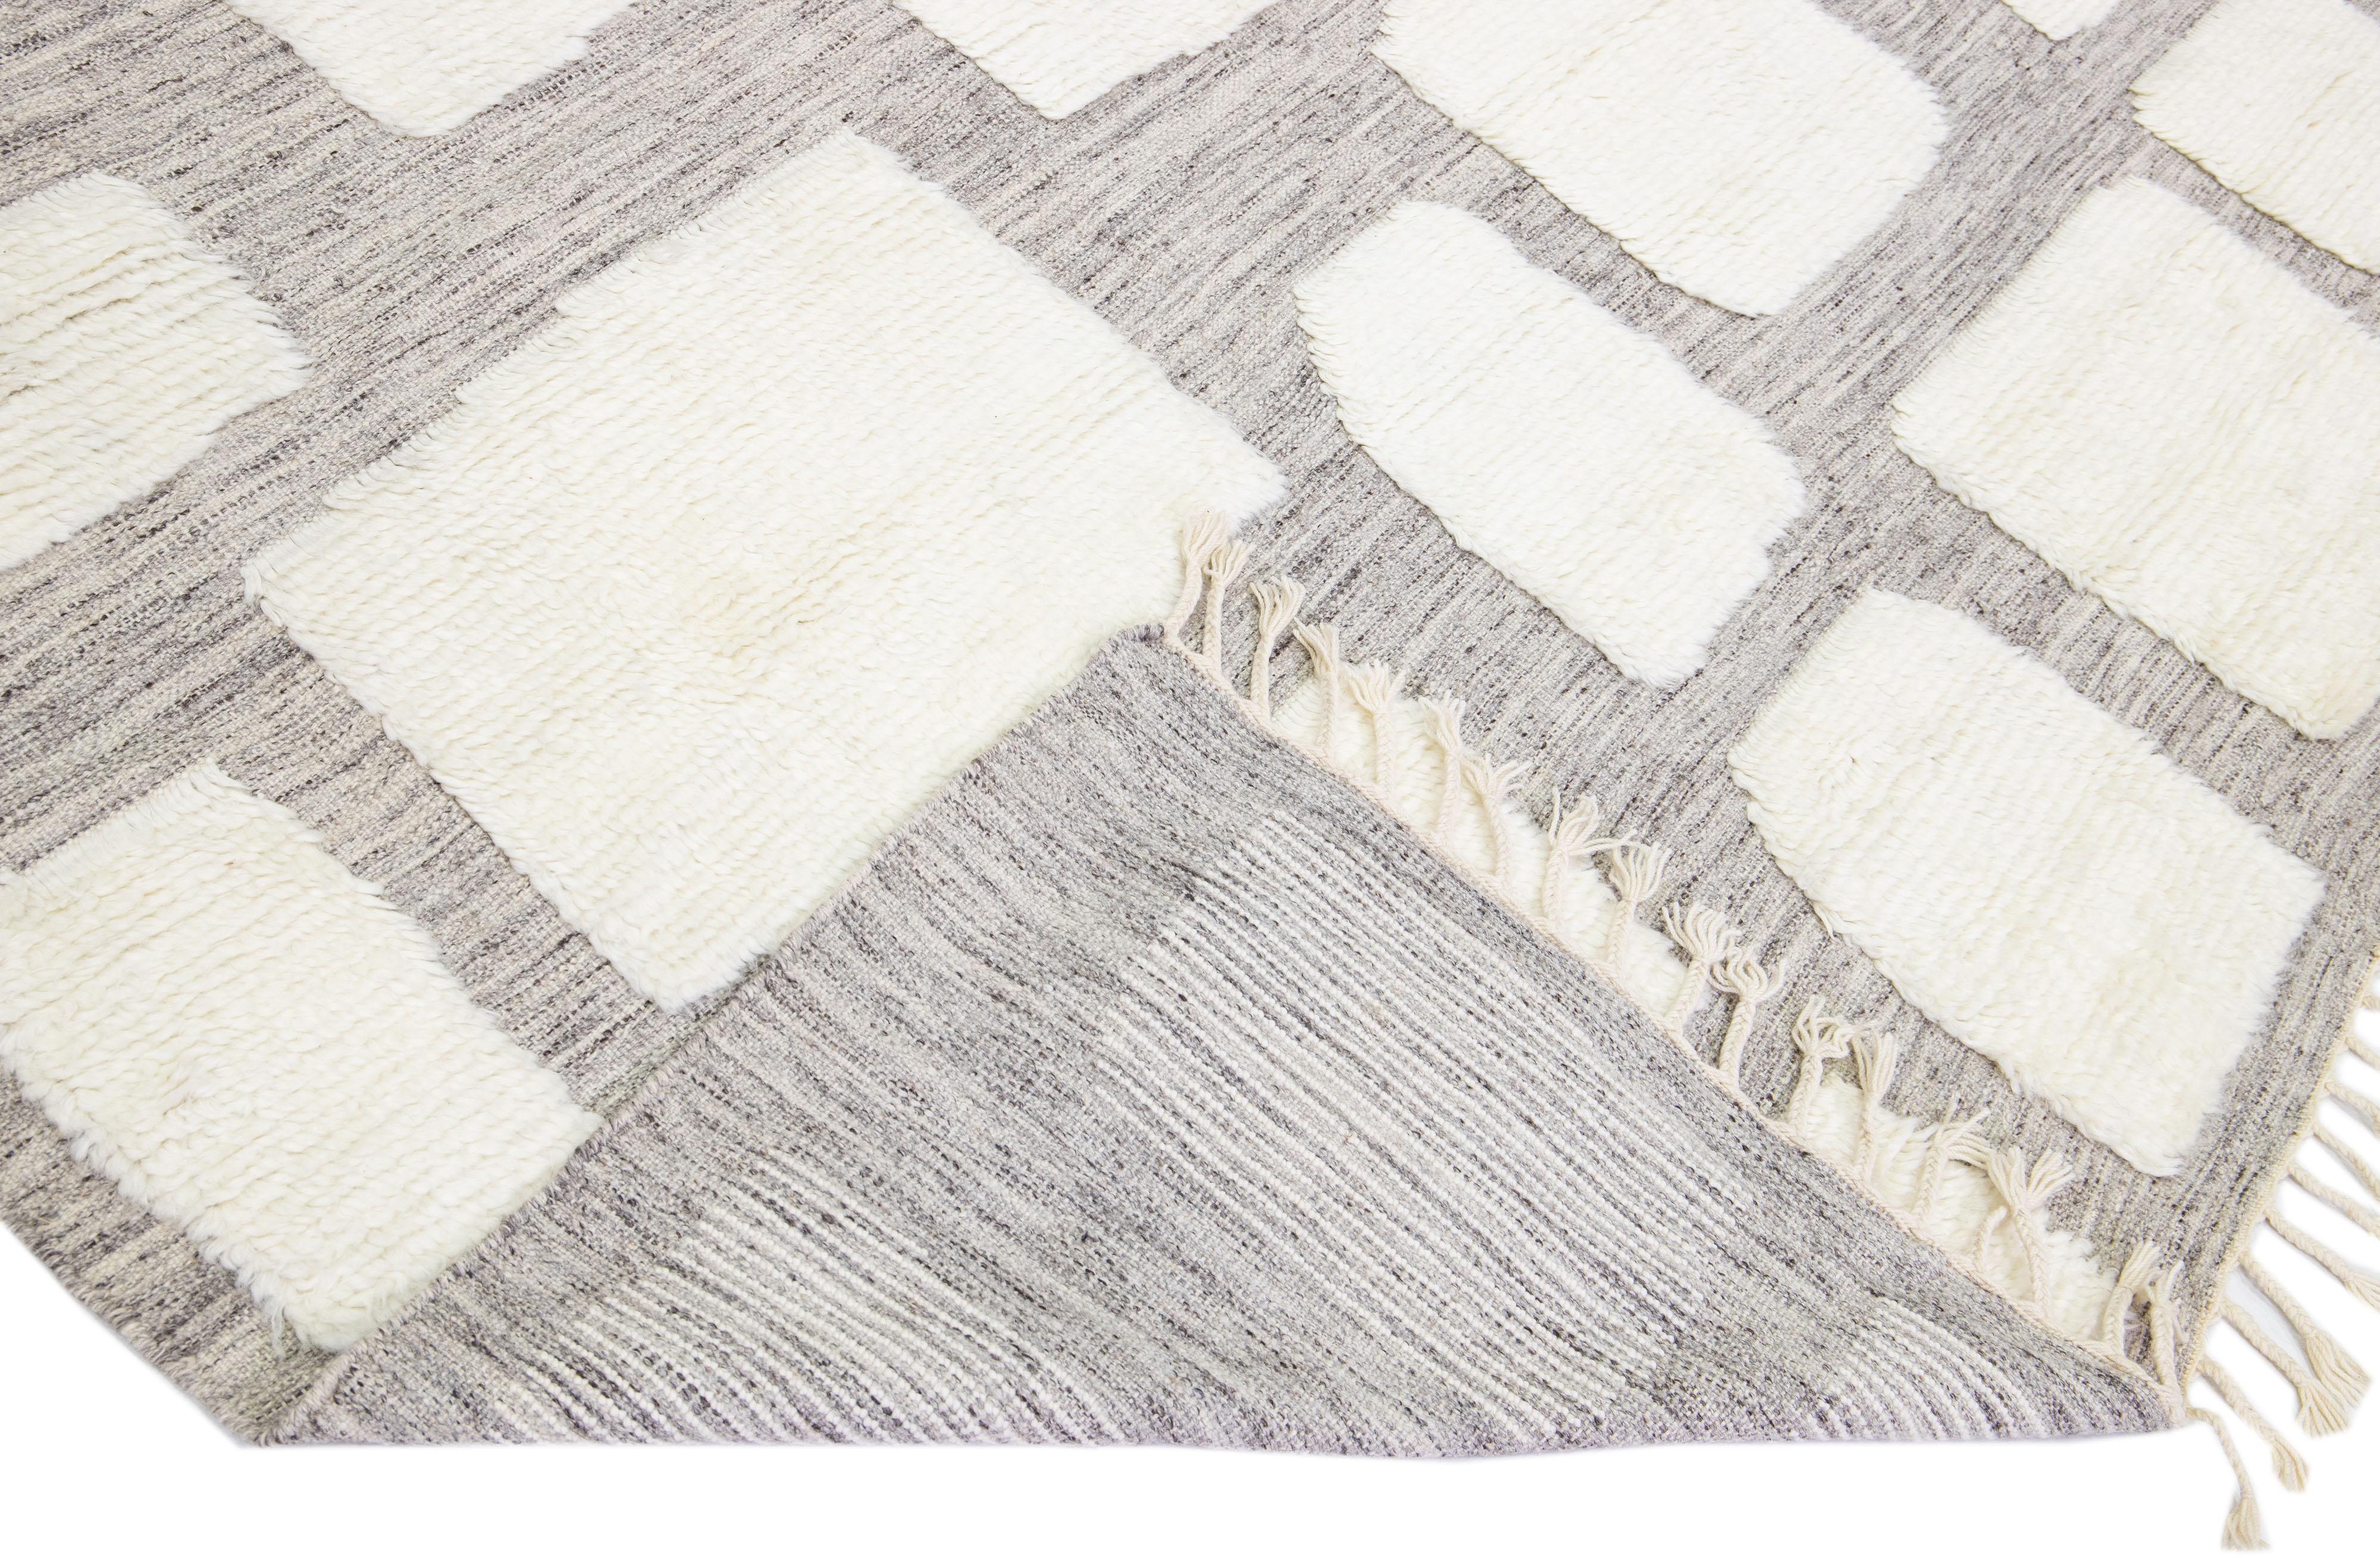 Beautiful modern Moroccan style hand-knotted wool rug with a light gray field and ivory accents in a gorgeous geometric high pile design.

This rug measures: 9'10